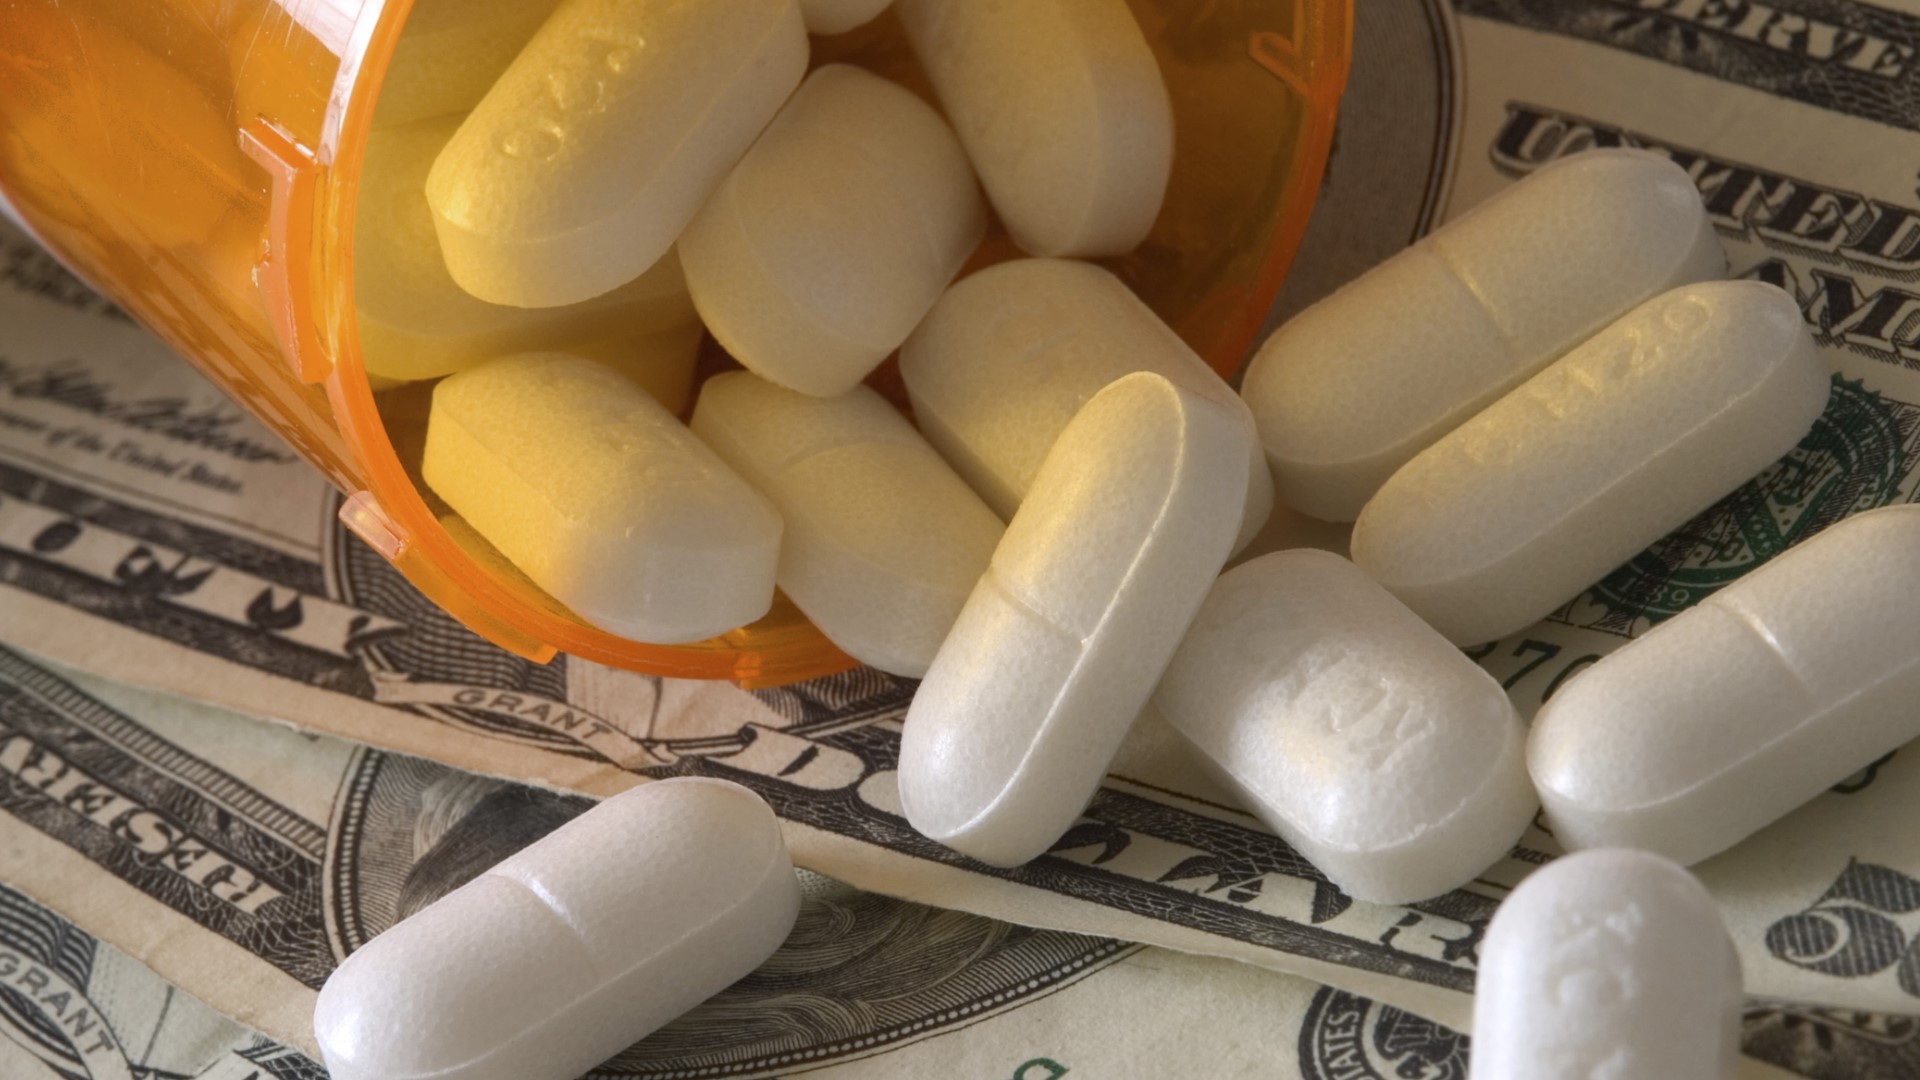 We're looking at ways you can save money on your medication!